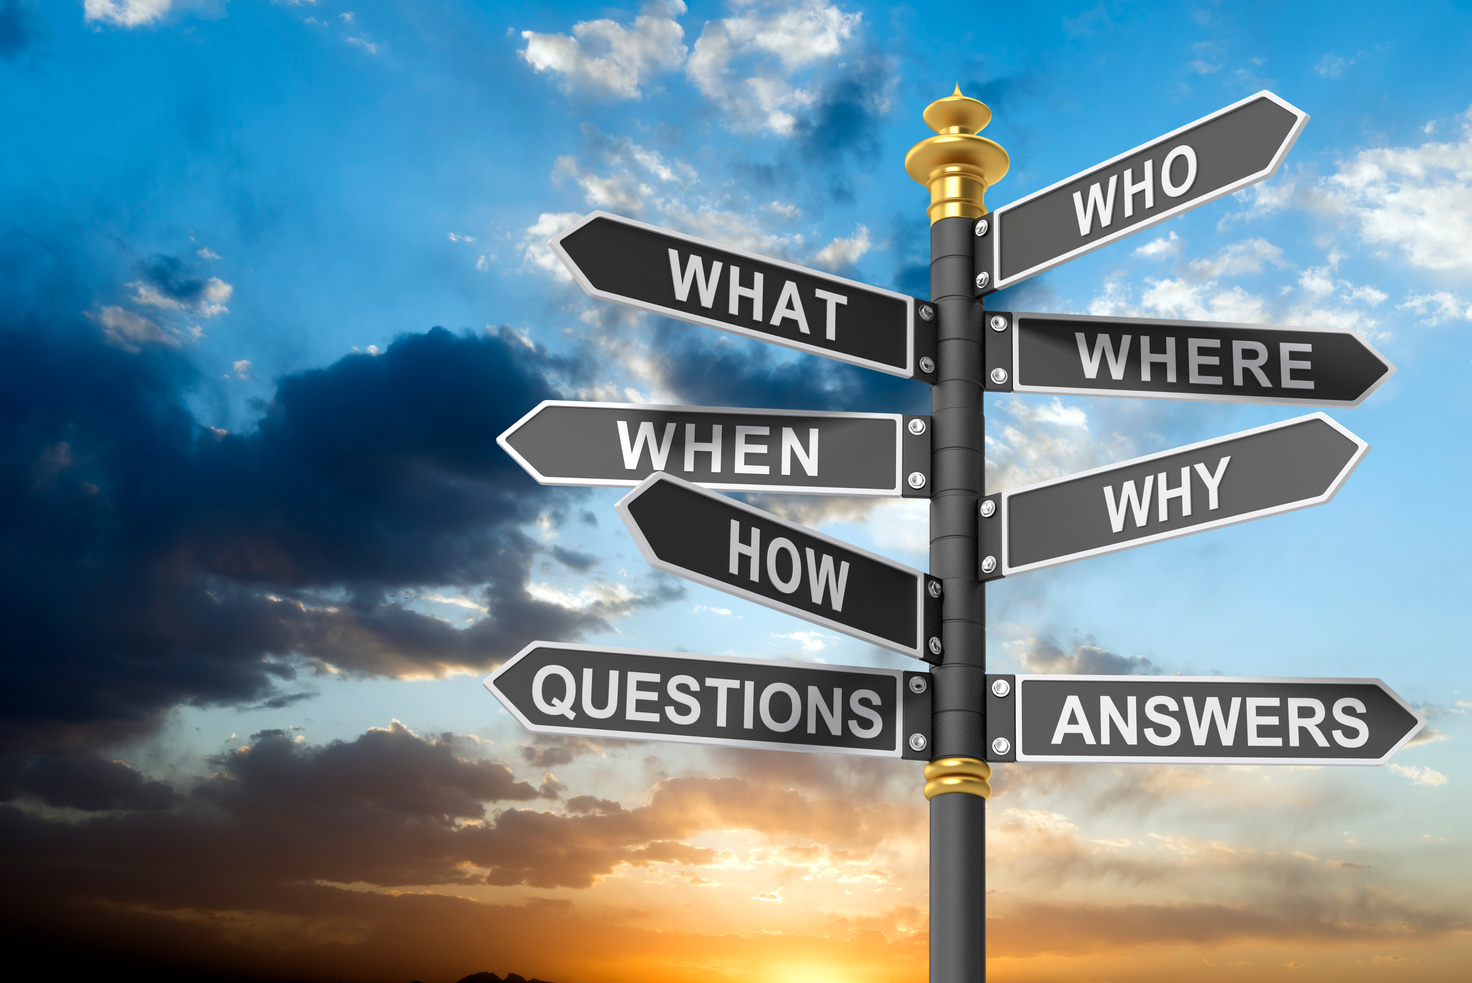 Questions and Answers signpost